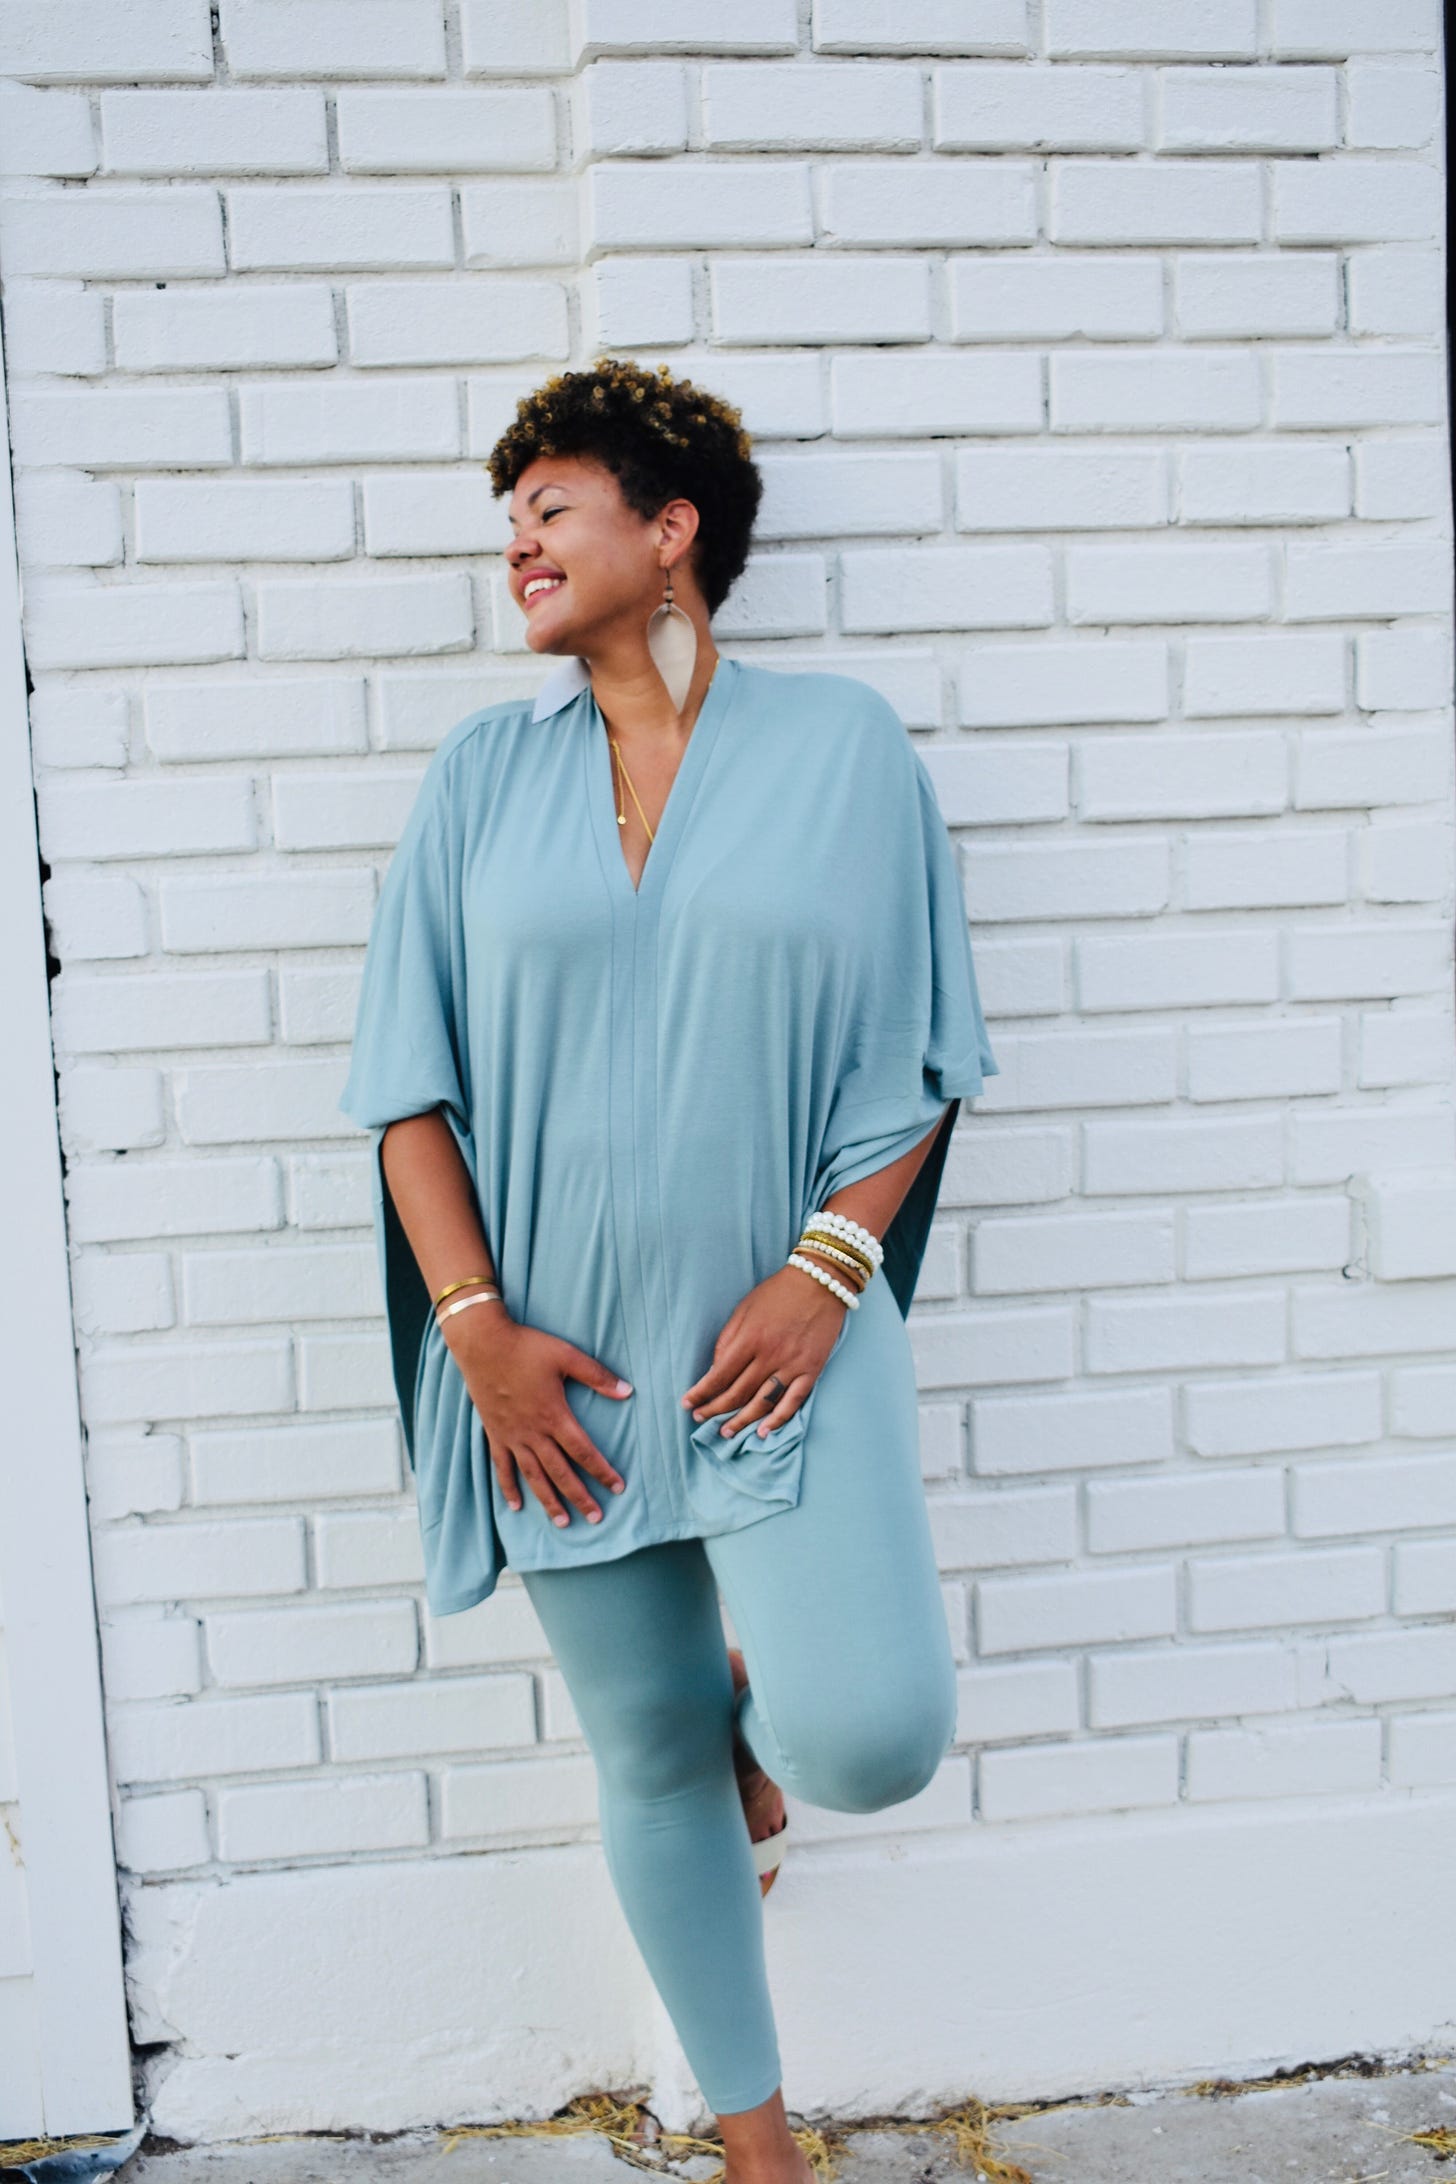 Headshot of today's guest, Whitney Trotter, standing against a white brick wall wearing a blue outfit and smiling